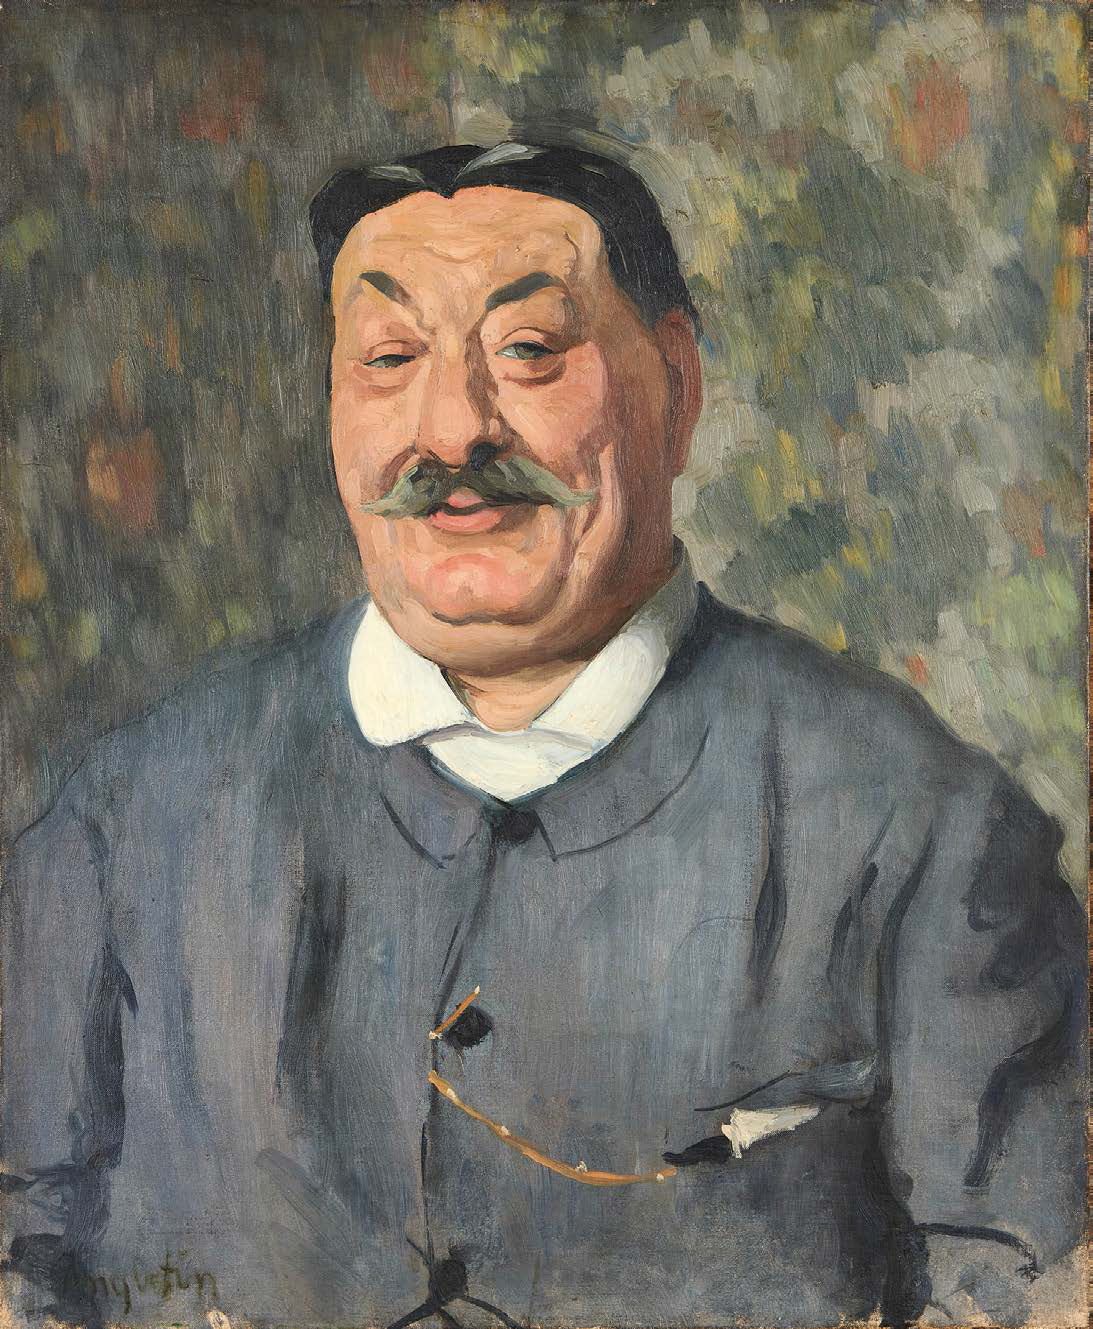 LOUIS ANQUETIN (1861-1932) 
Portrait of a man
Oil on canvas, signed lower left.
&hellip;